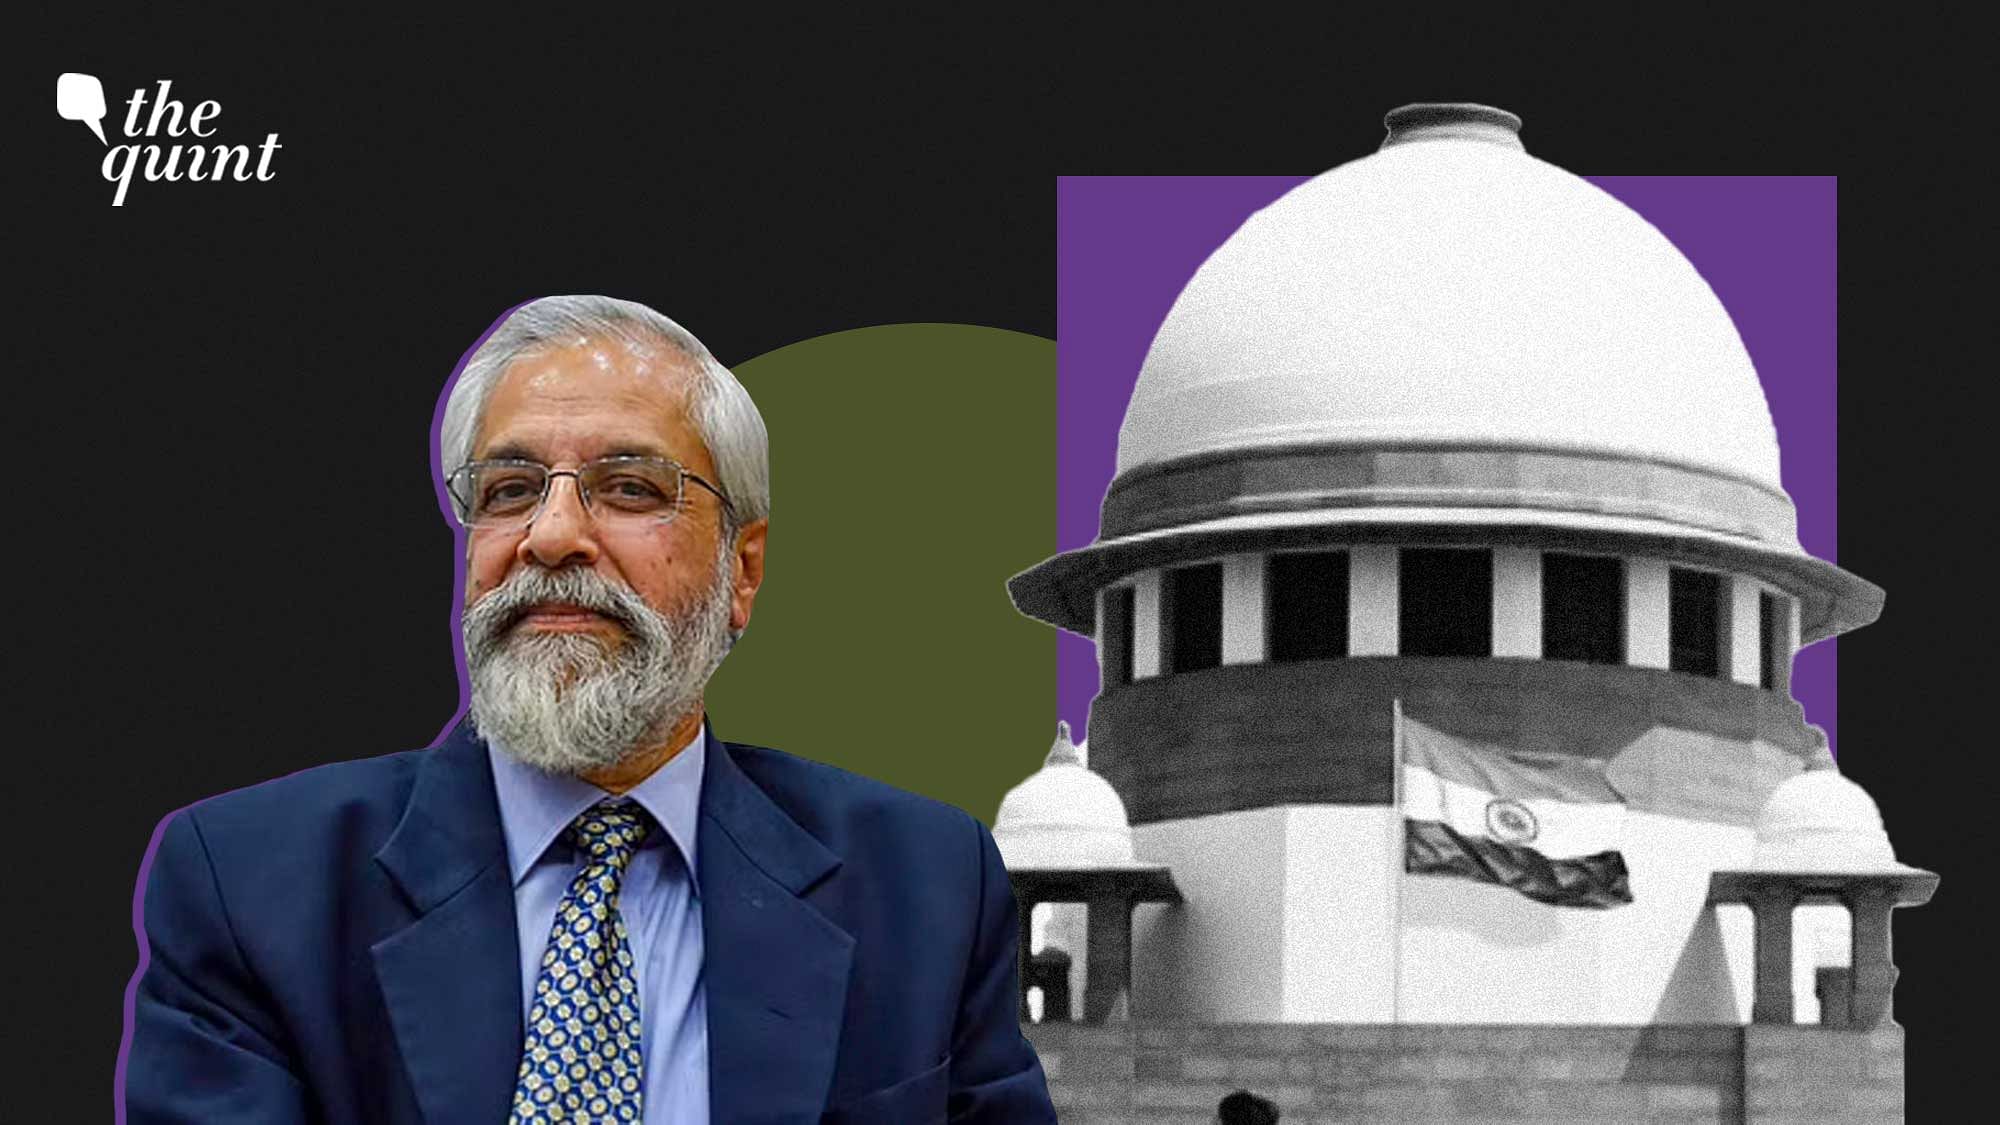 <div class="paragraphs"><p>Justice Madan Lokur answered The Quint’s questions about the <a href="https://www.thequint.com/news/law/sc-can-reject-zakia-jafris-plea-but-how-did-teesta-setalvad-end-up-in-custody">chilling effect of judgments</a> such as the one in the <a href="https://www.thequint.com/news/law/gujarat-riots-larger-conspiracy-case-supreme-court-order-on-zakia-jafris-plea">Zakia Jafri case</a>, within 24 hours of which <a href="https://www.thequint.com/news/india/politicians-activists-reactions-teesta-setalvad-arrest">activist Teesta Setalvad</a>, and former Gujarat DGP RB Sreekumar were arrested, and a case was slapped against Setalvad, Sreekumar and former IPS officer Sanjiv Bhatt.</p></div>